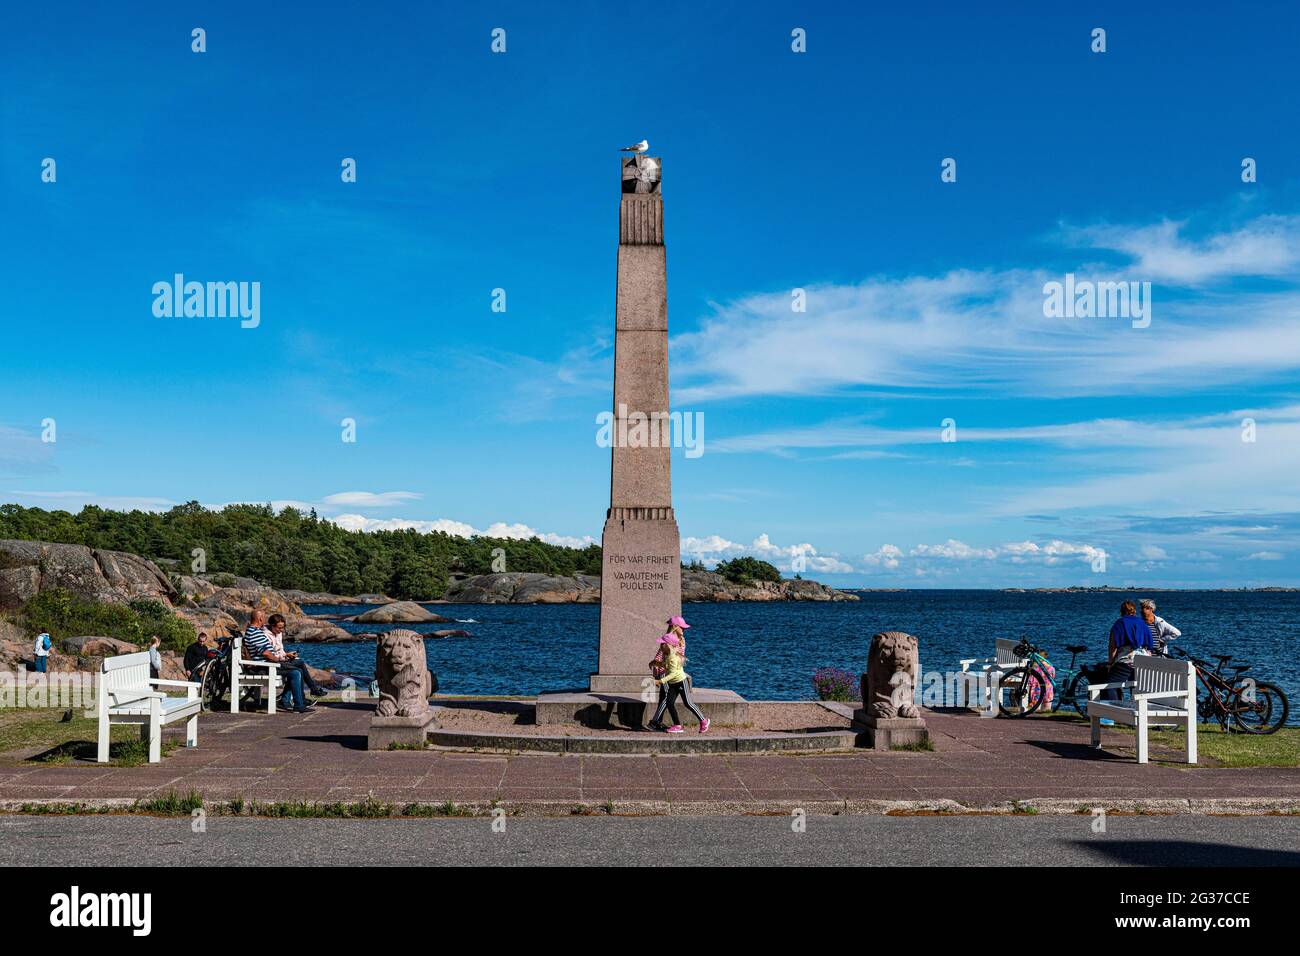 Monument of Liberty, Hanko southern Finland Stock Photo